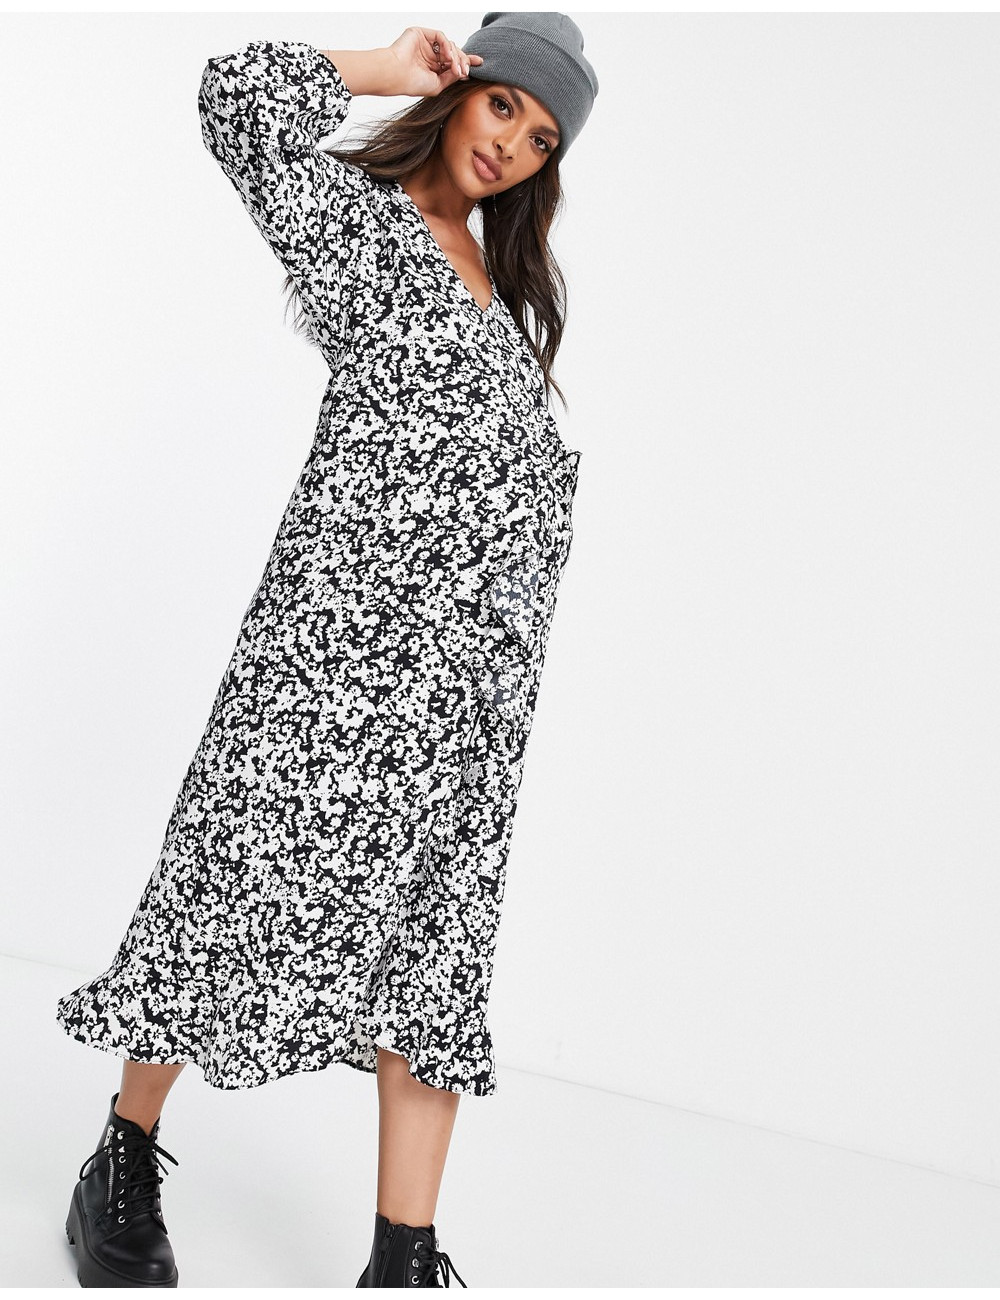 Topshop Maternity  floral...